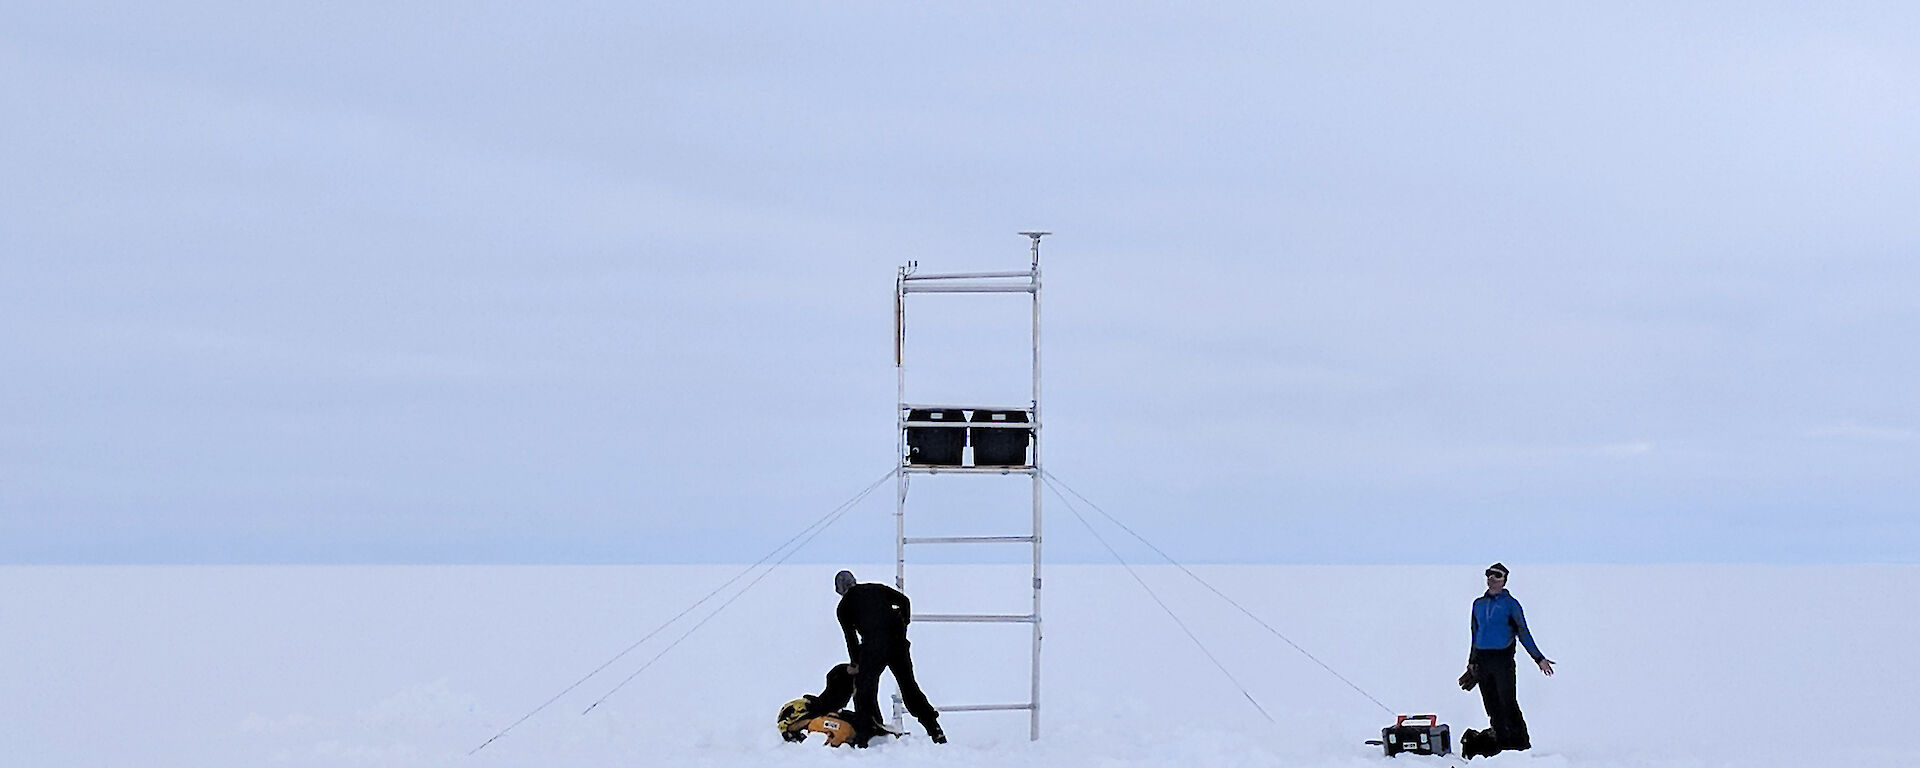 Two sillhouettes of people with instruments on scaffolding on a glacier